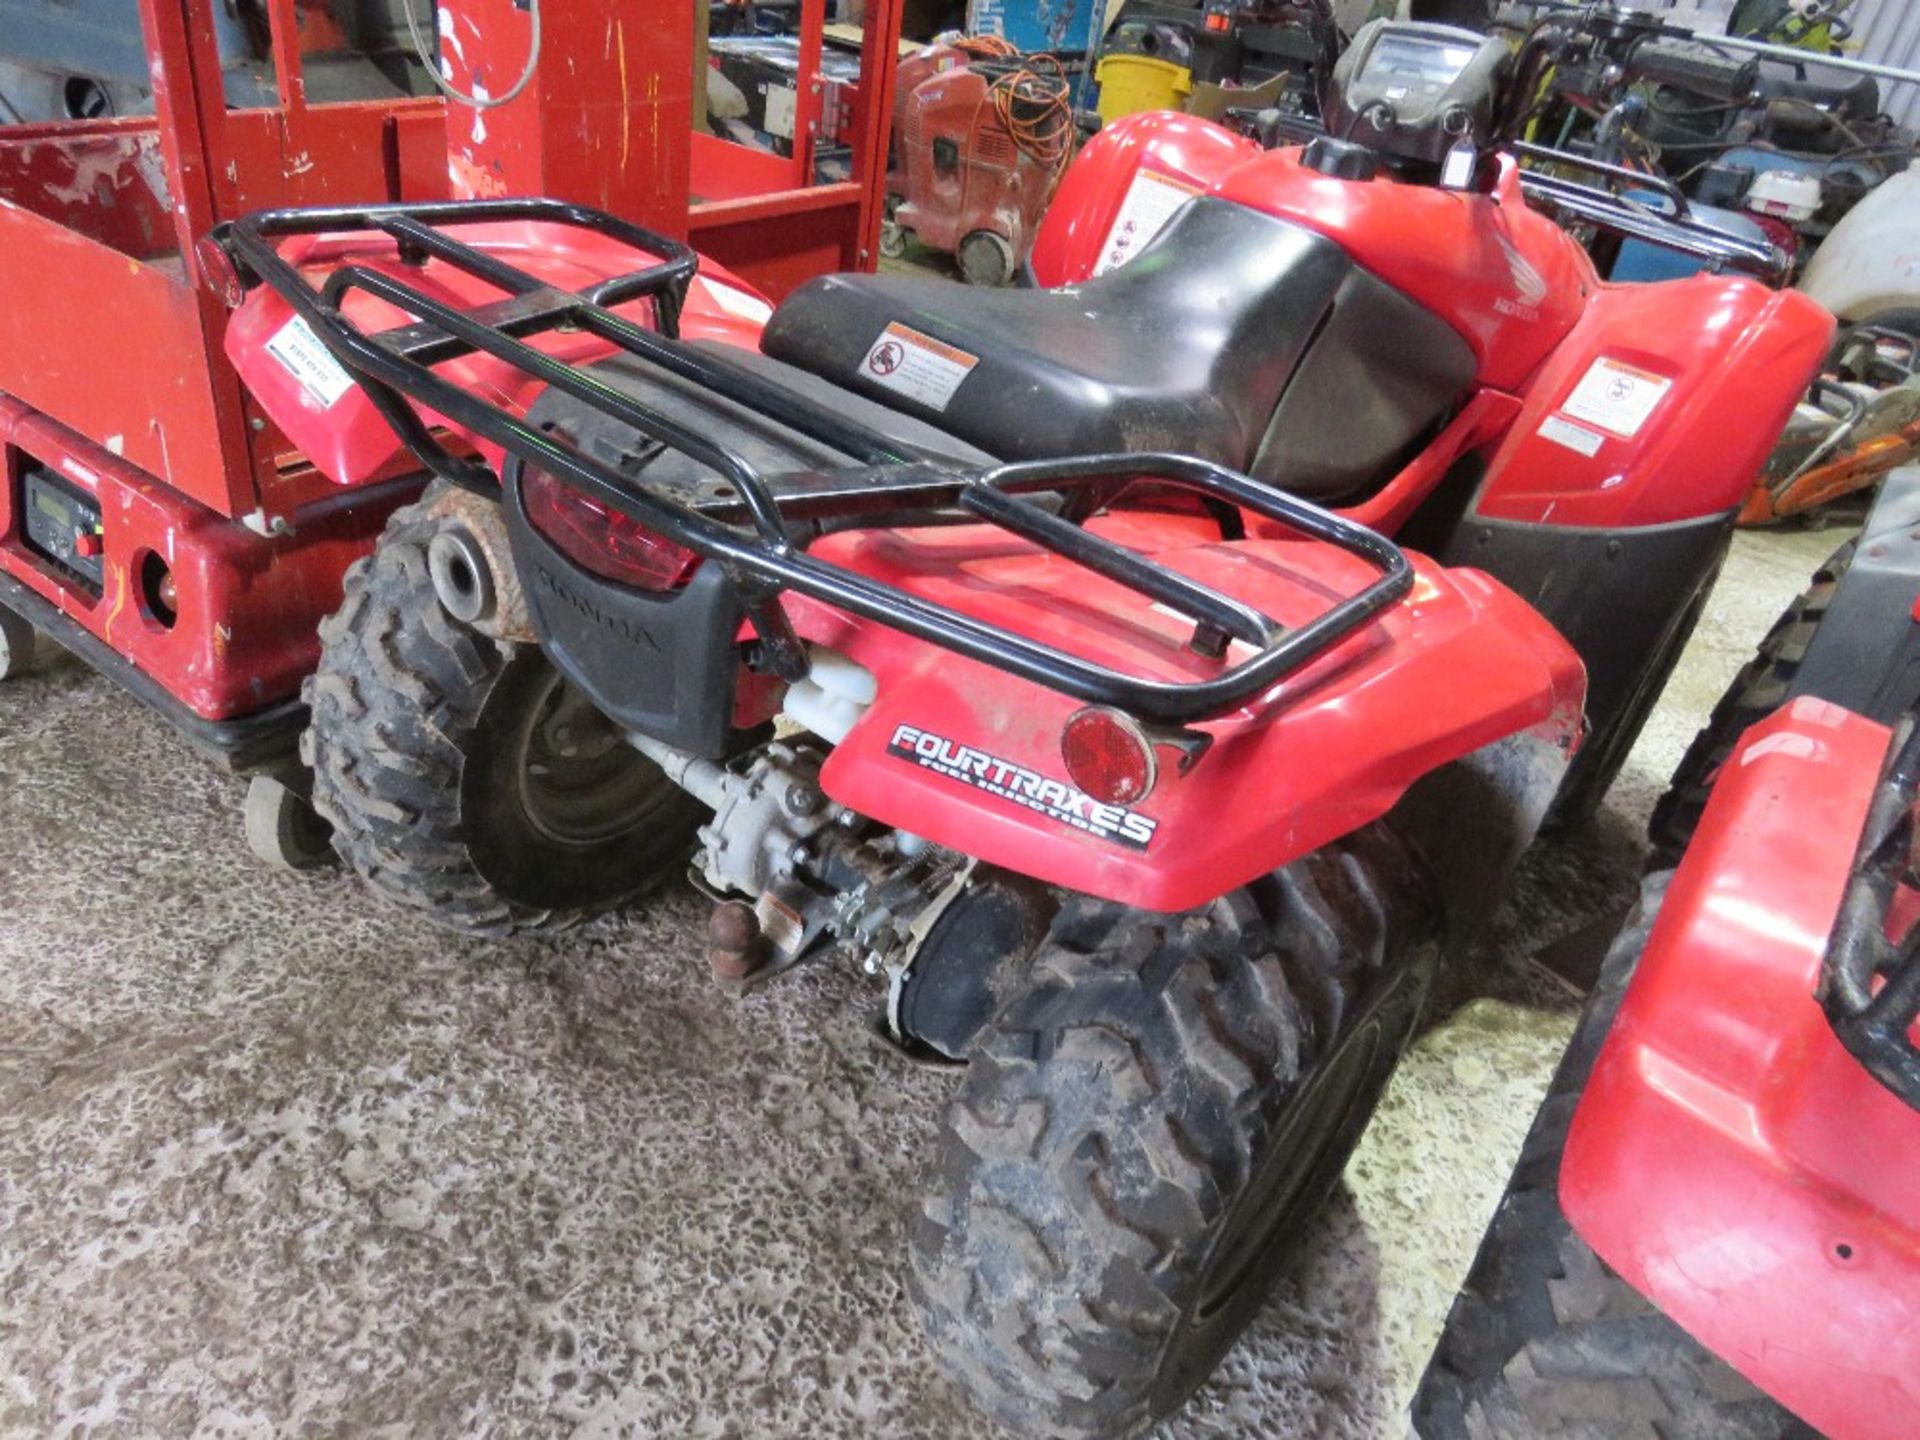 HONDA SELECTABLE 4 WHEEL DRIVE QUAD BIKE WITH ELECTRONIC GEAR SELECTION. WHEN TESTED WAS SEEN TO RUN - Image 6 of 11